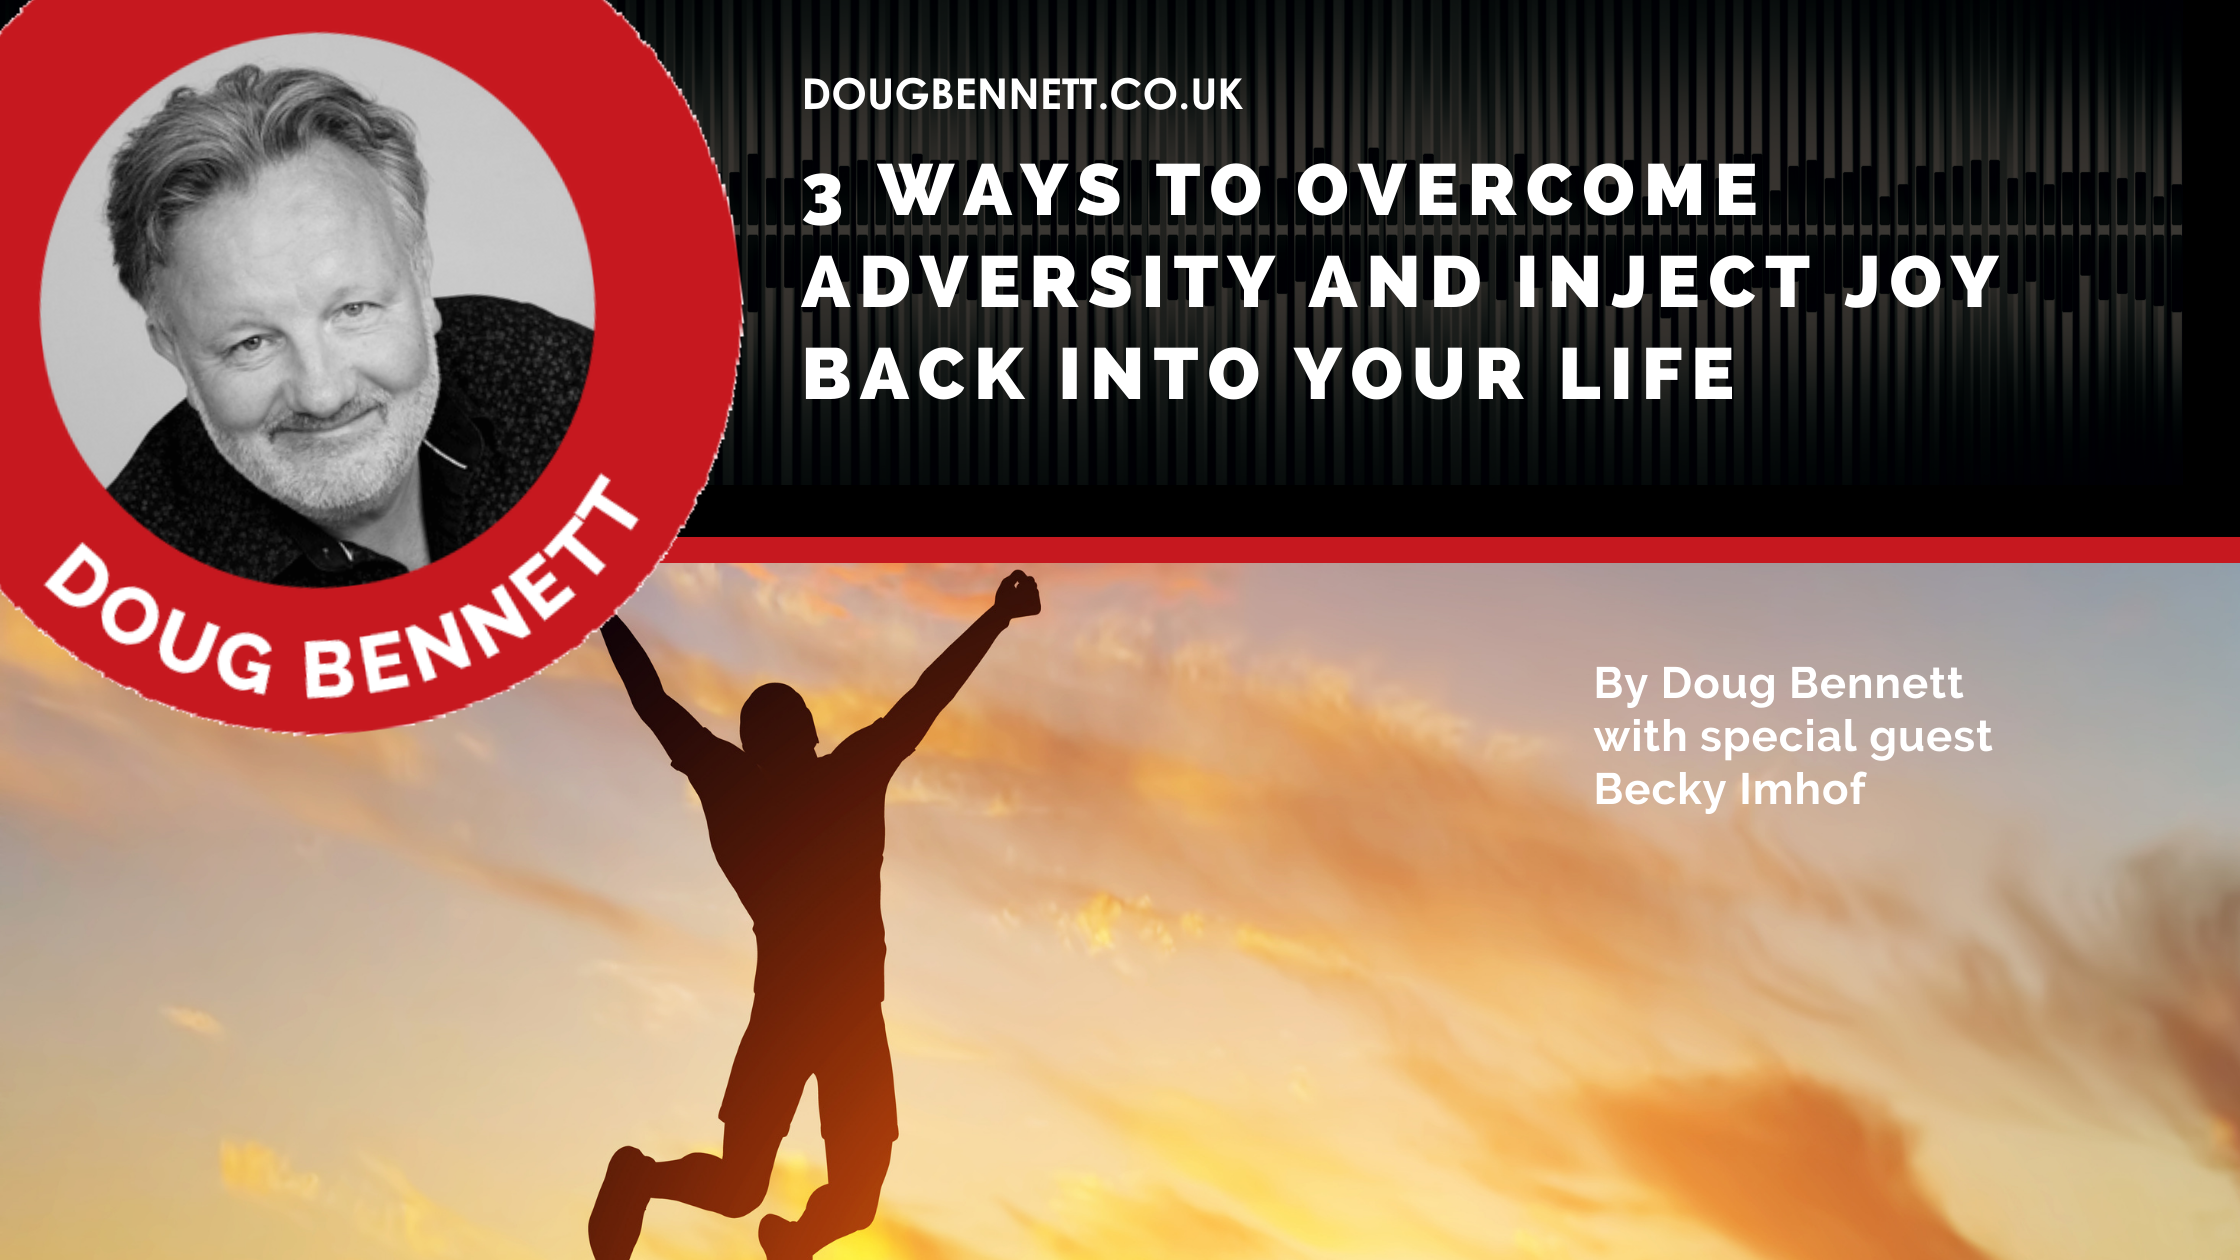 3 Ways To Overcome Adversity And Inject Joy Back Into Your Life